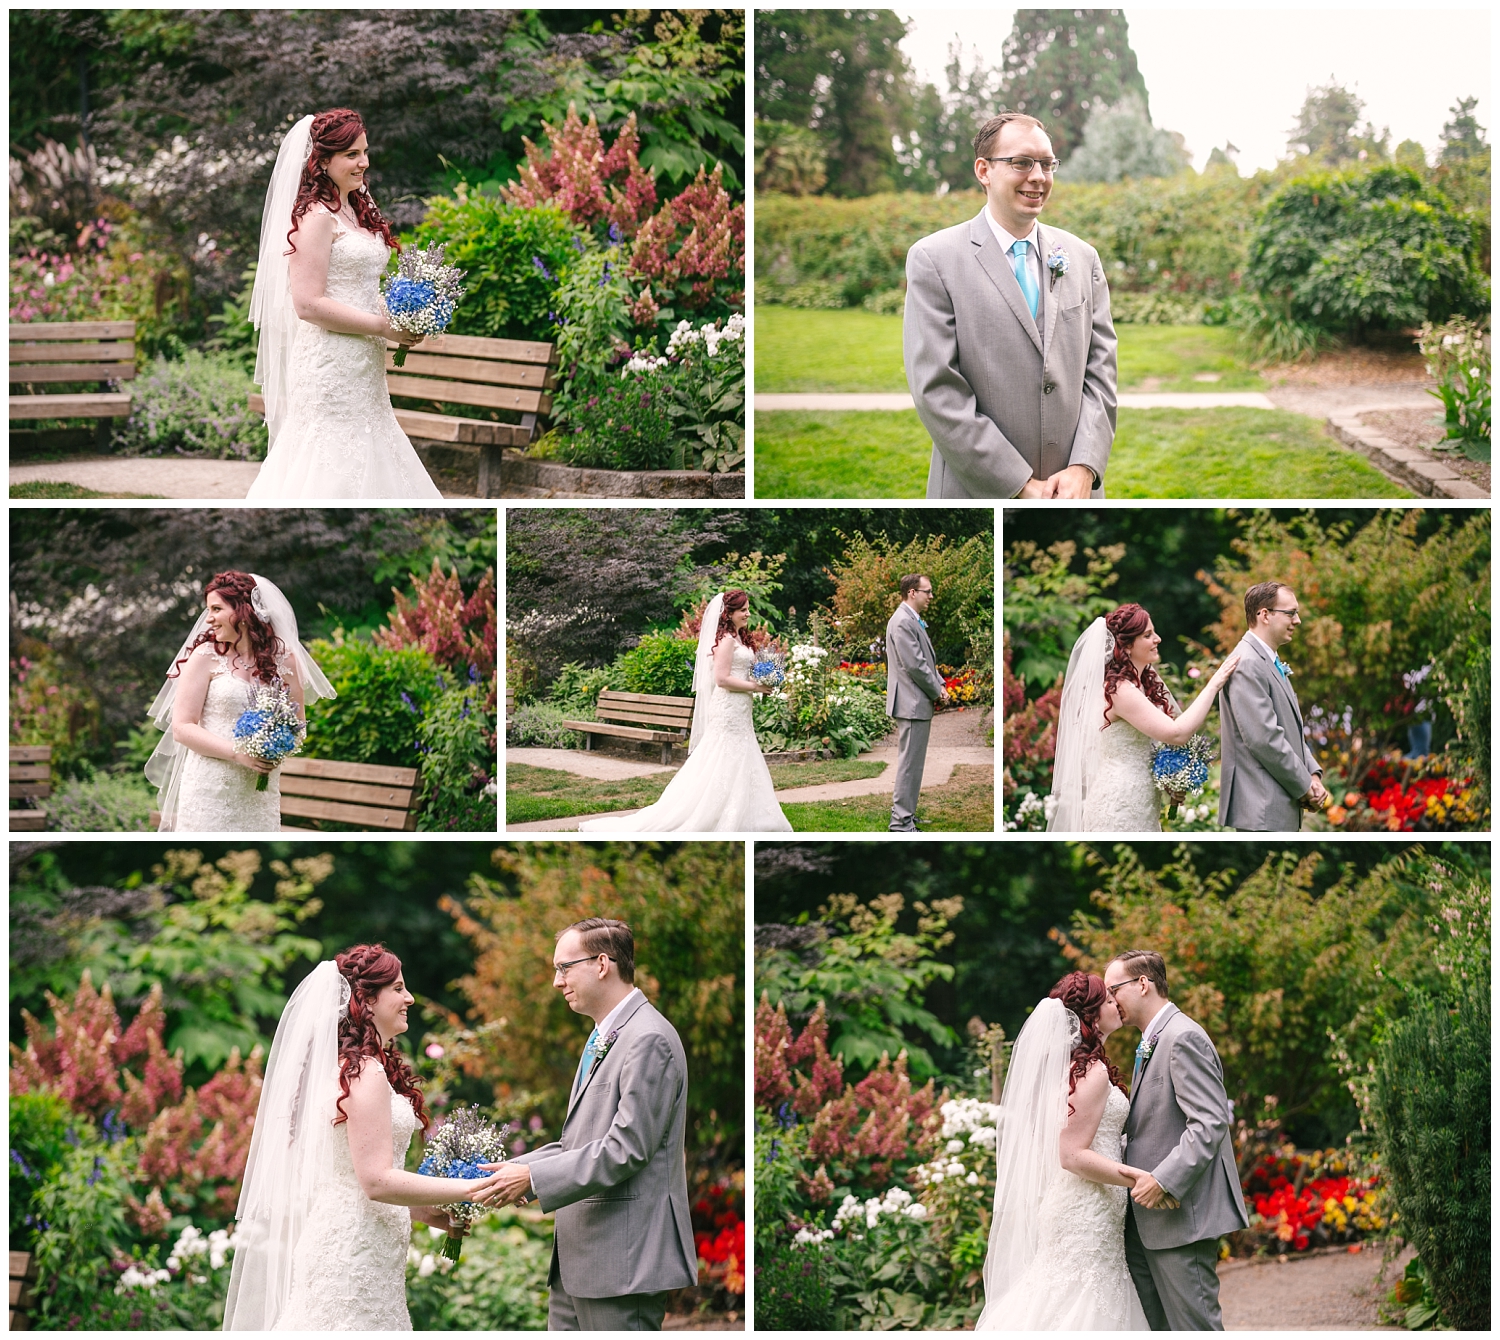 Bride and Groom First Look at Point Defiance Park Rose Garden in Tacoma, WA